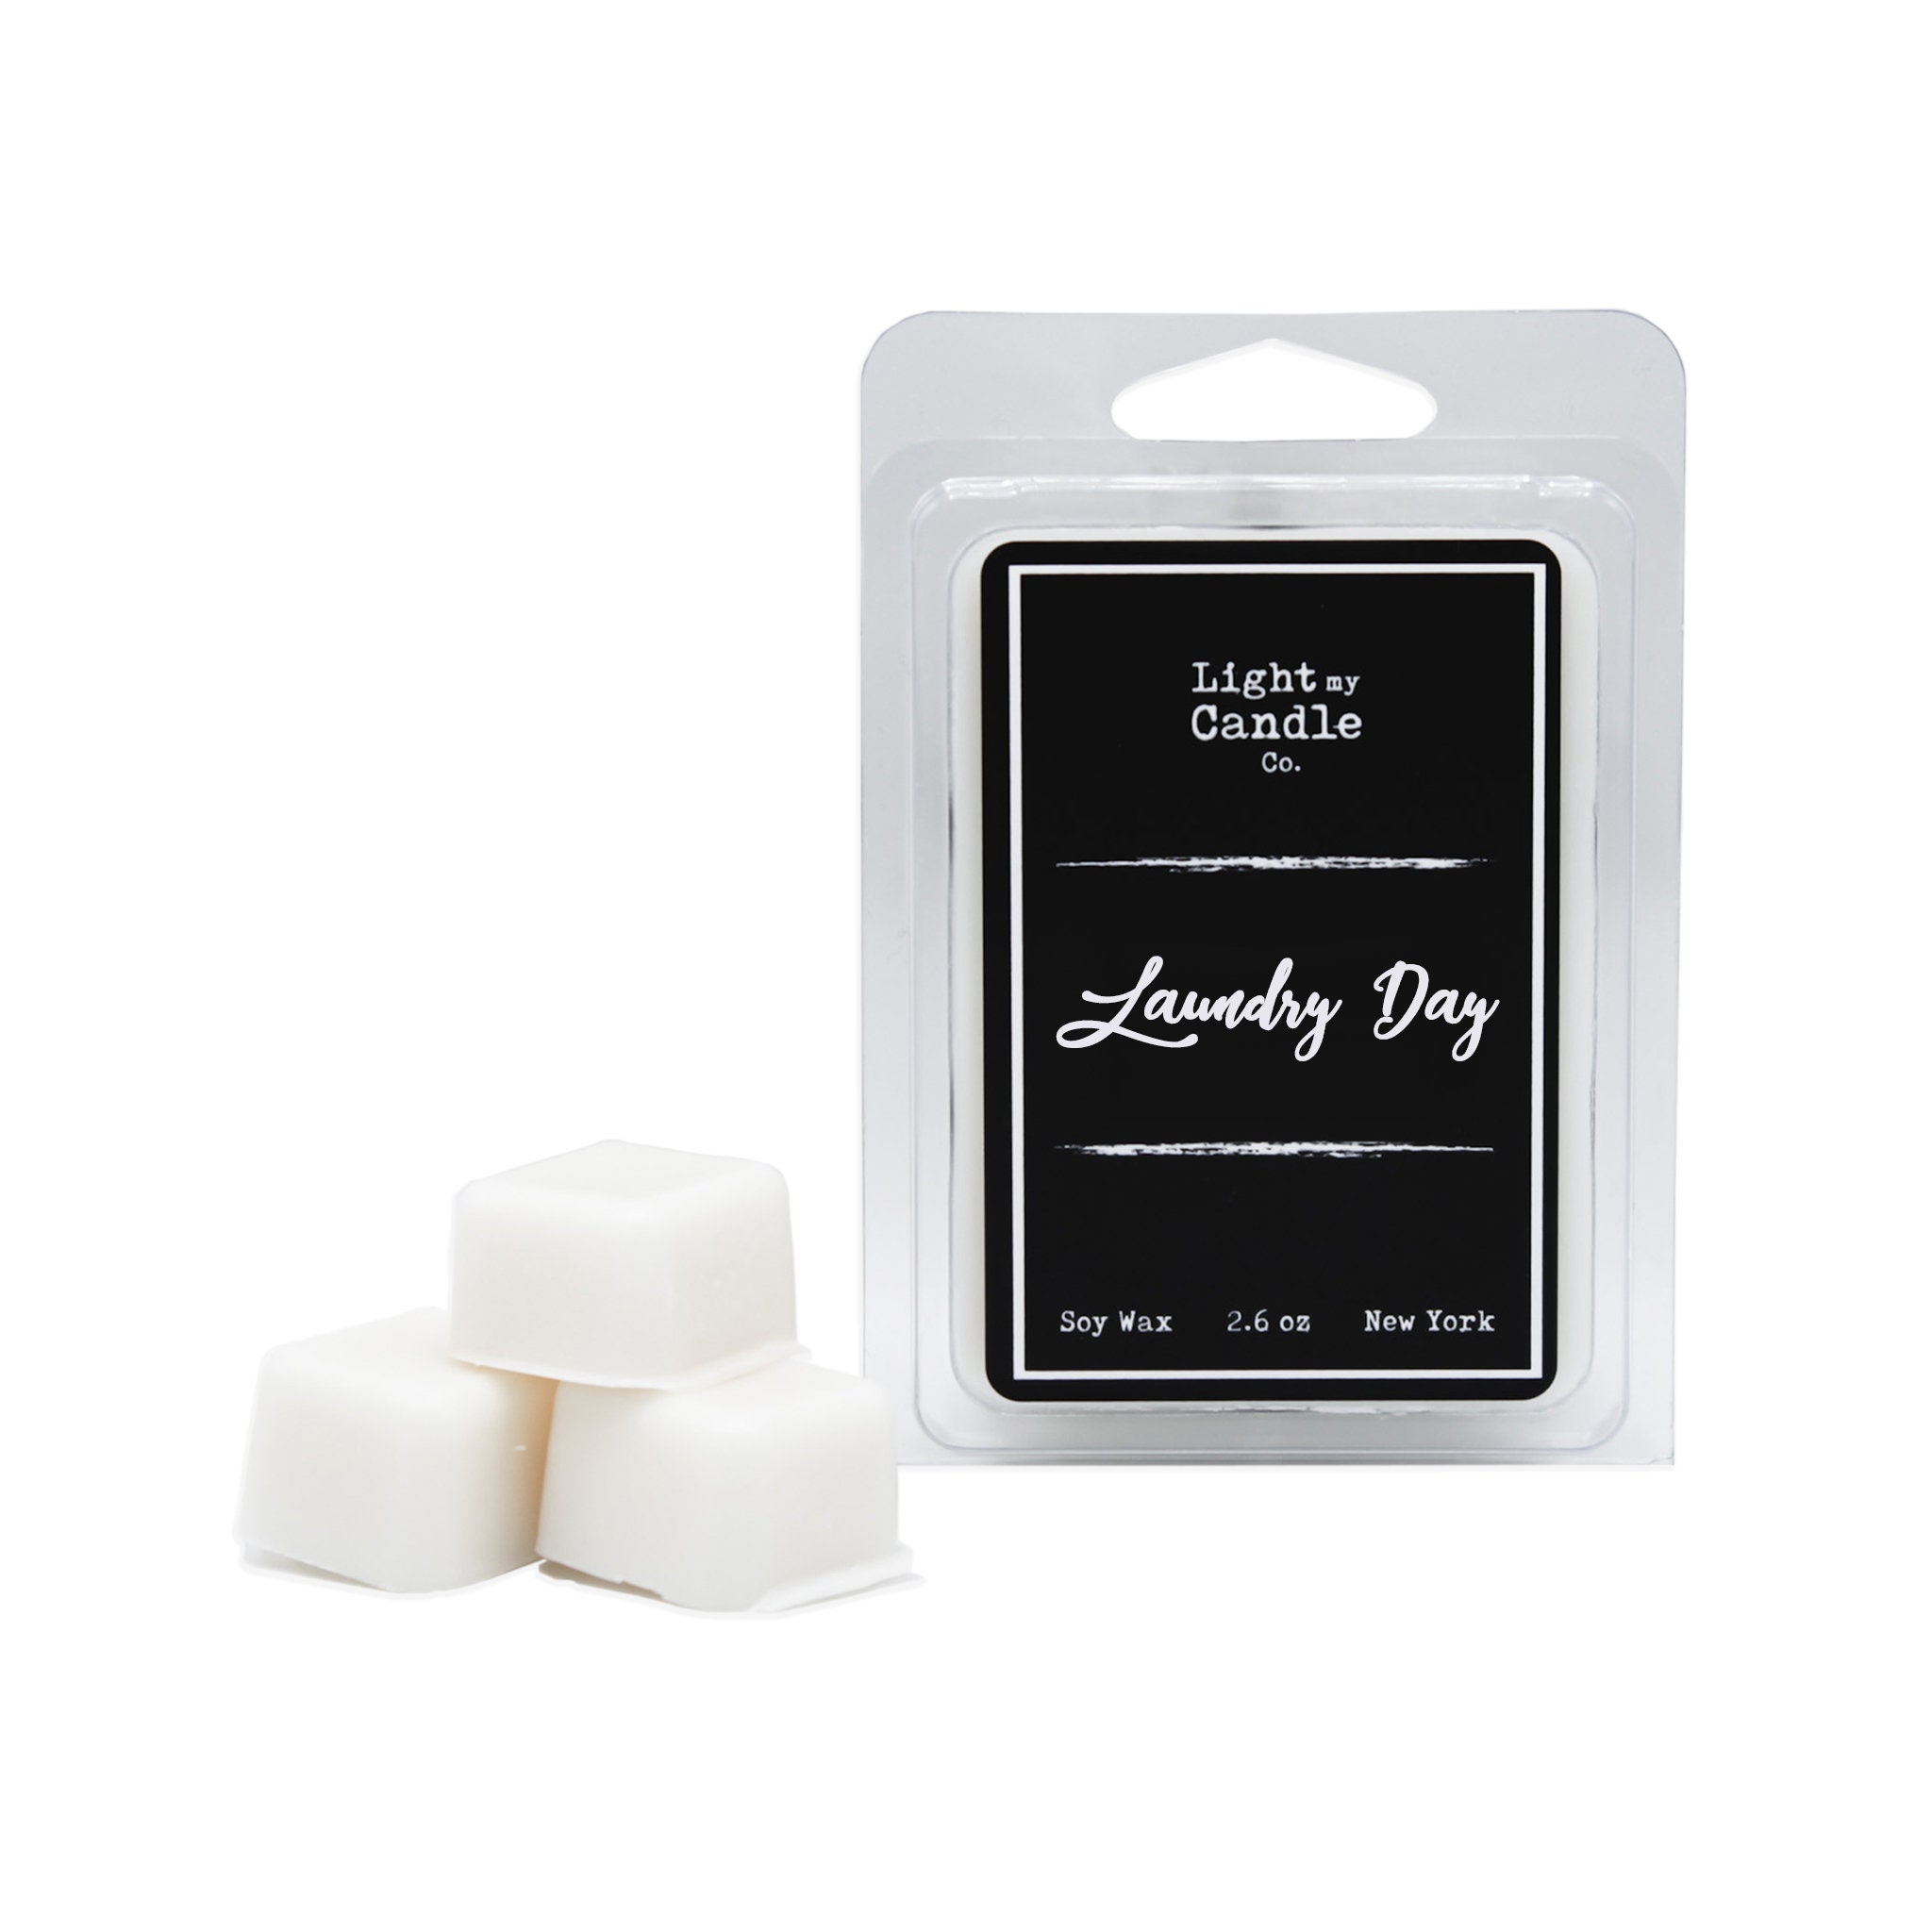 Bliss Unstoppable Wax Melts, Highly Fragranced Soy Wax, Snap Bar, Hearts,  for Her, Eco Friendly, Shimmery, Laundry, Scent Booster, Fruity 